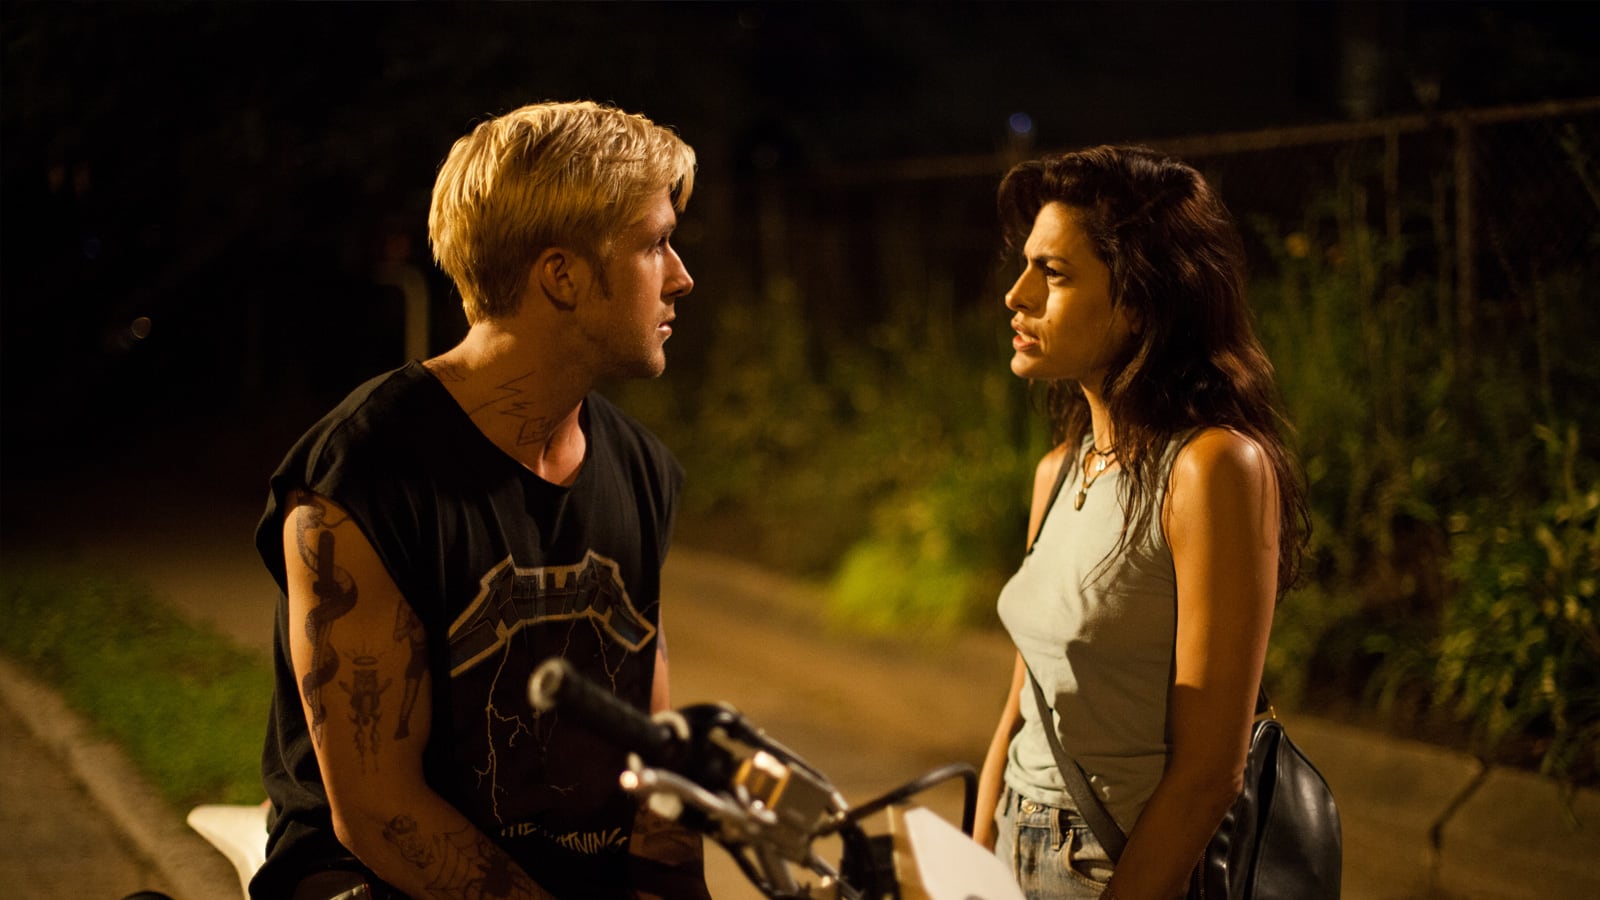 Still from The Place Beyond the Pines